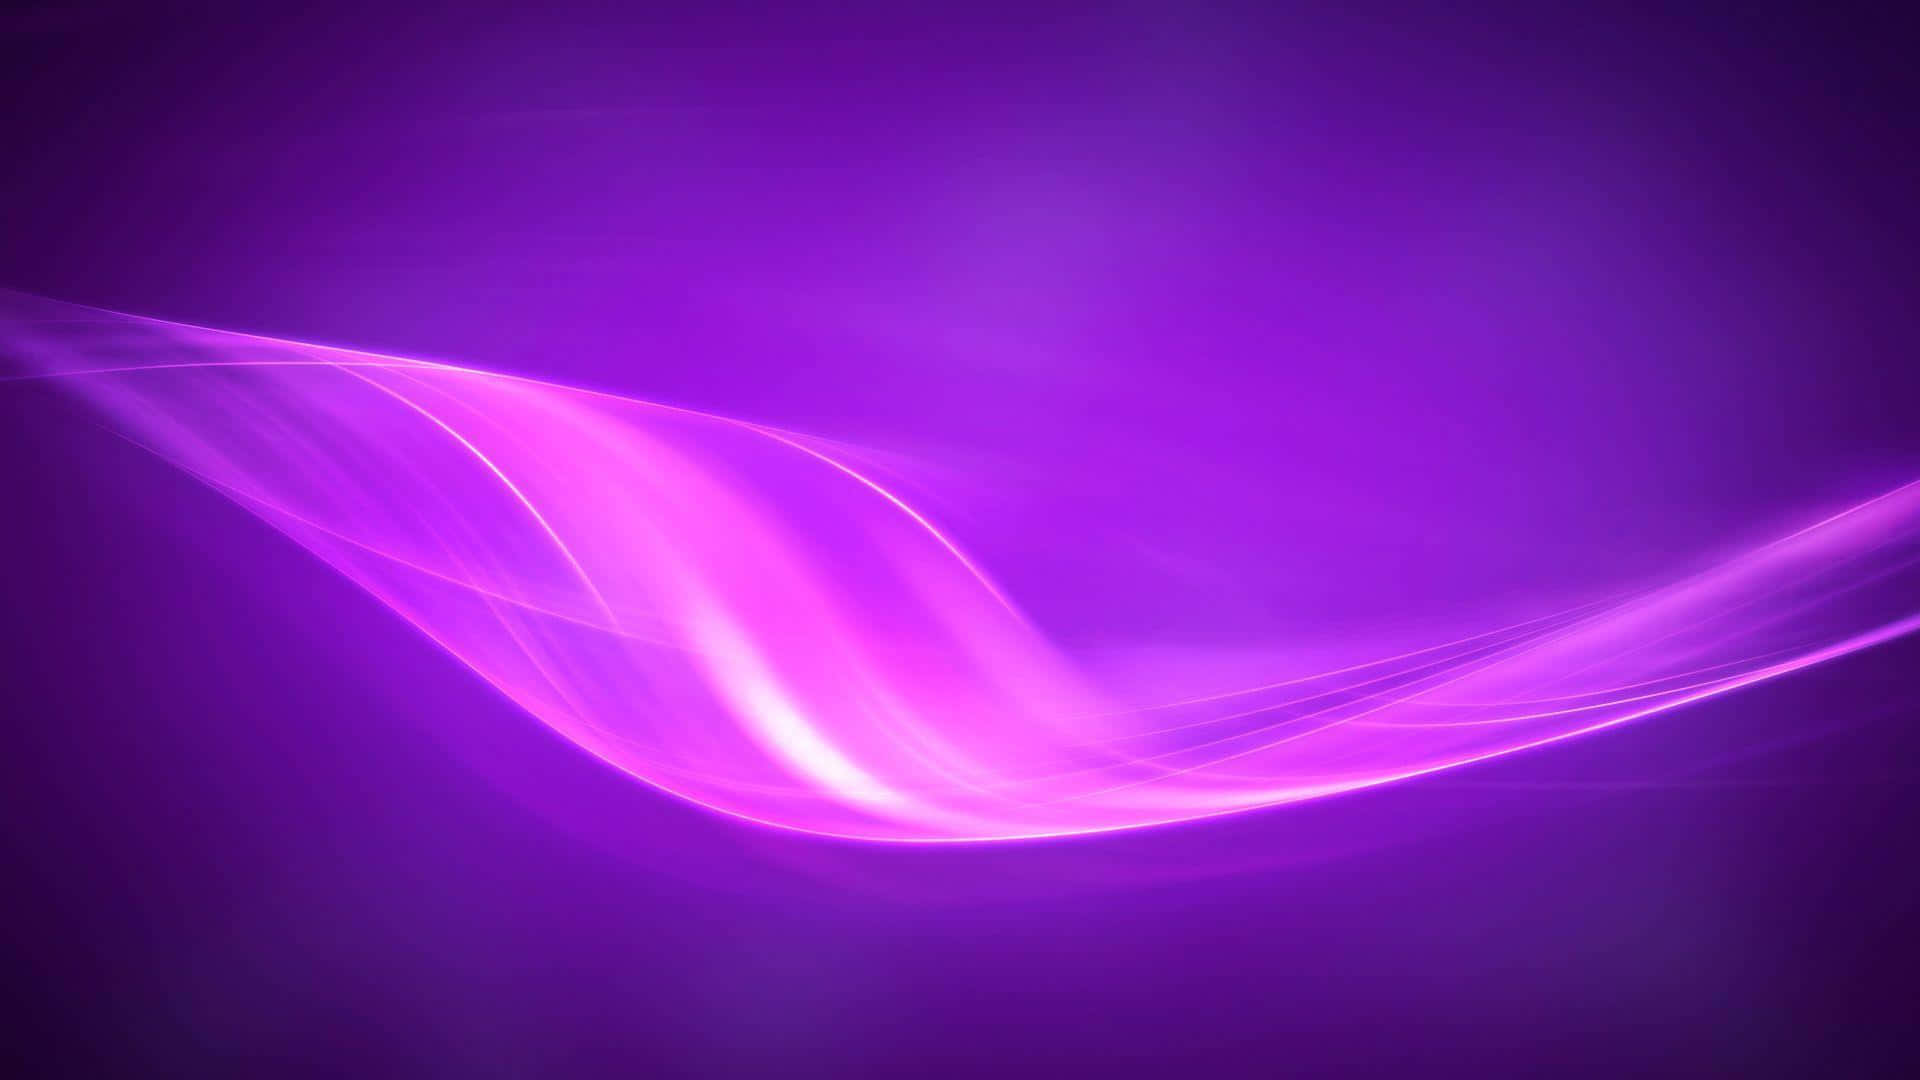 A vivid purple hue paints the background in an artistic fashion